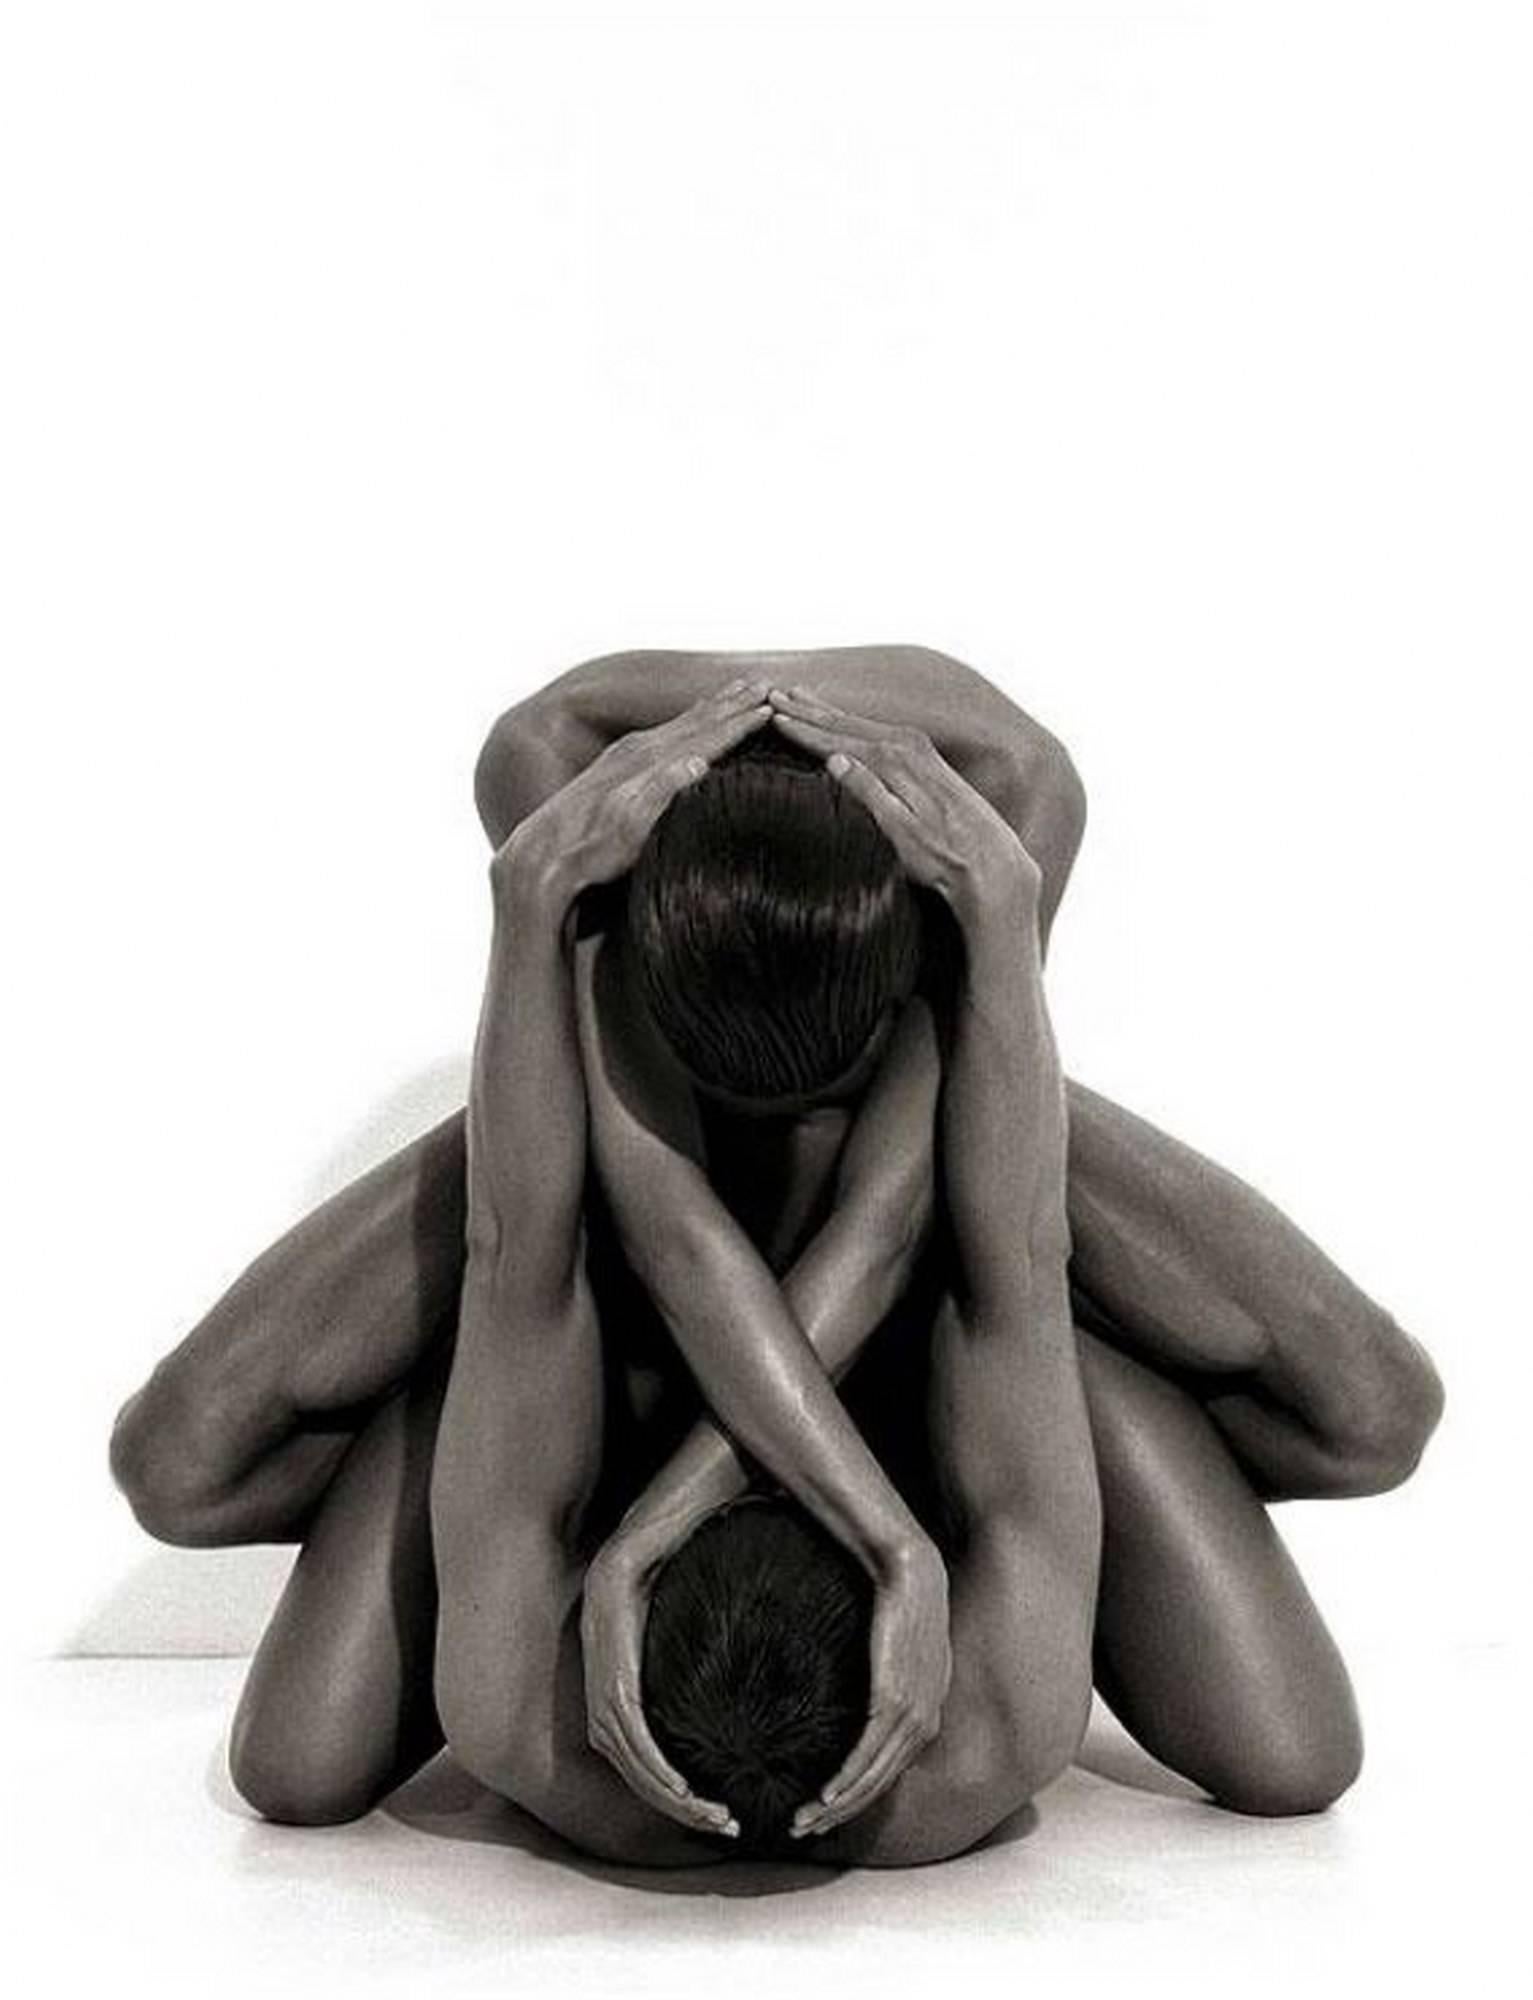 Yvonne & Tom, nude photograph of man and woman intertwined in embrace